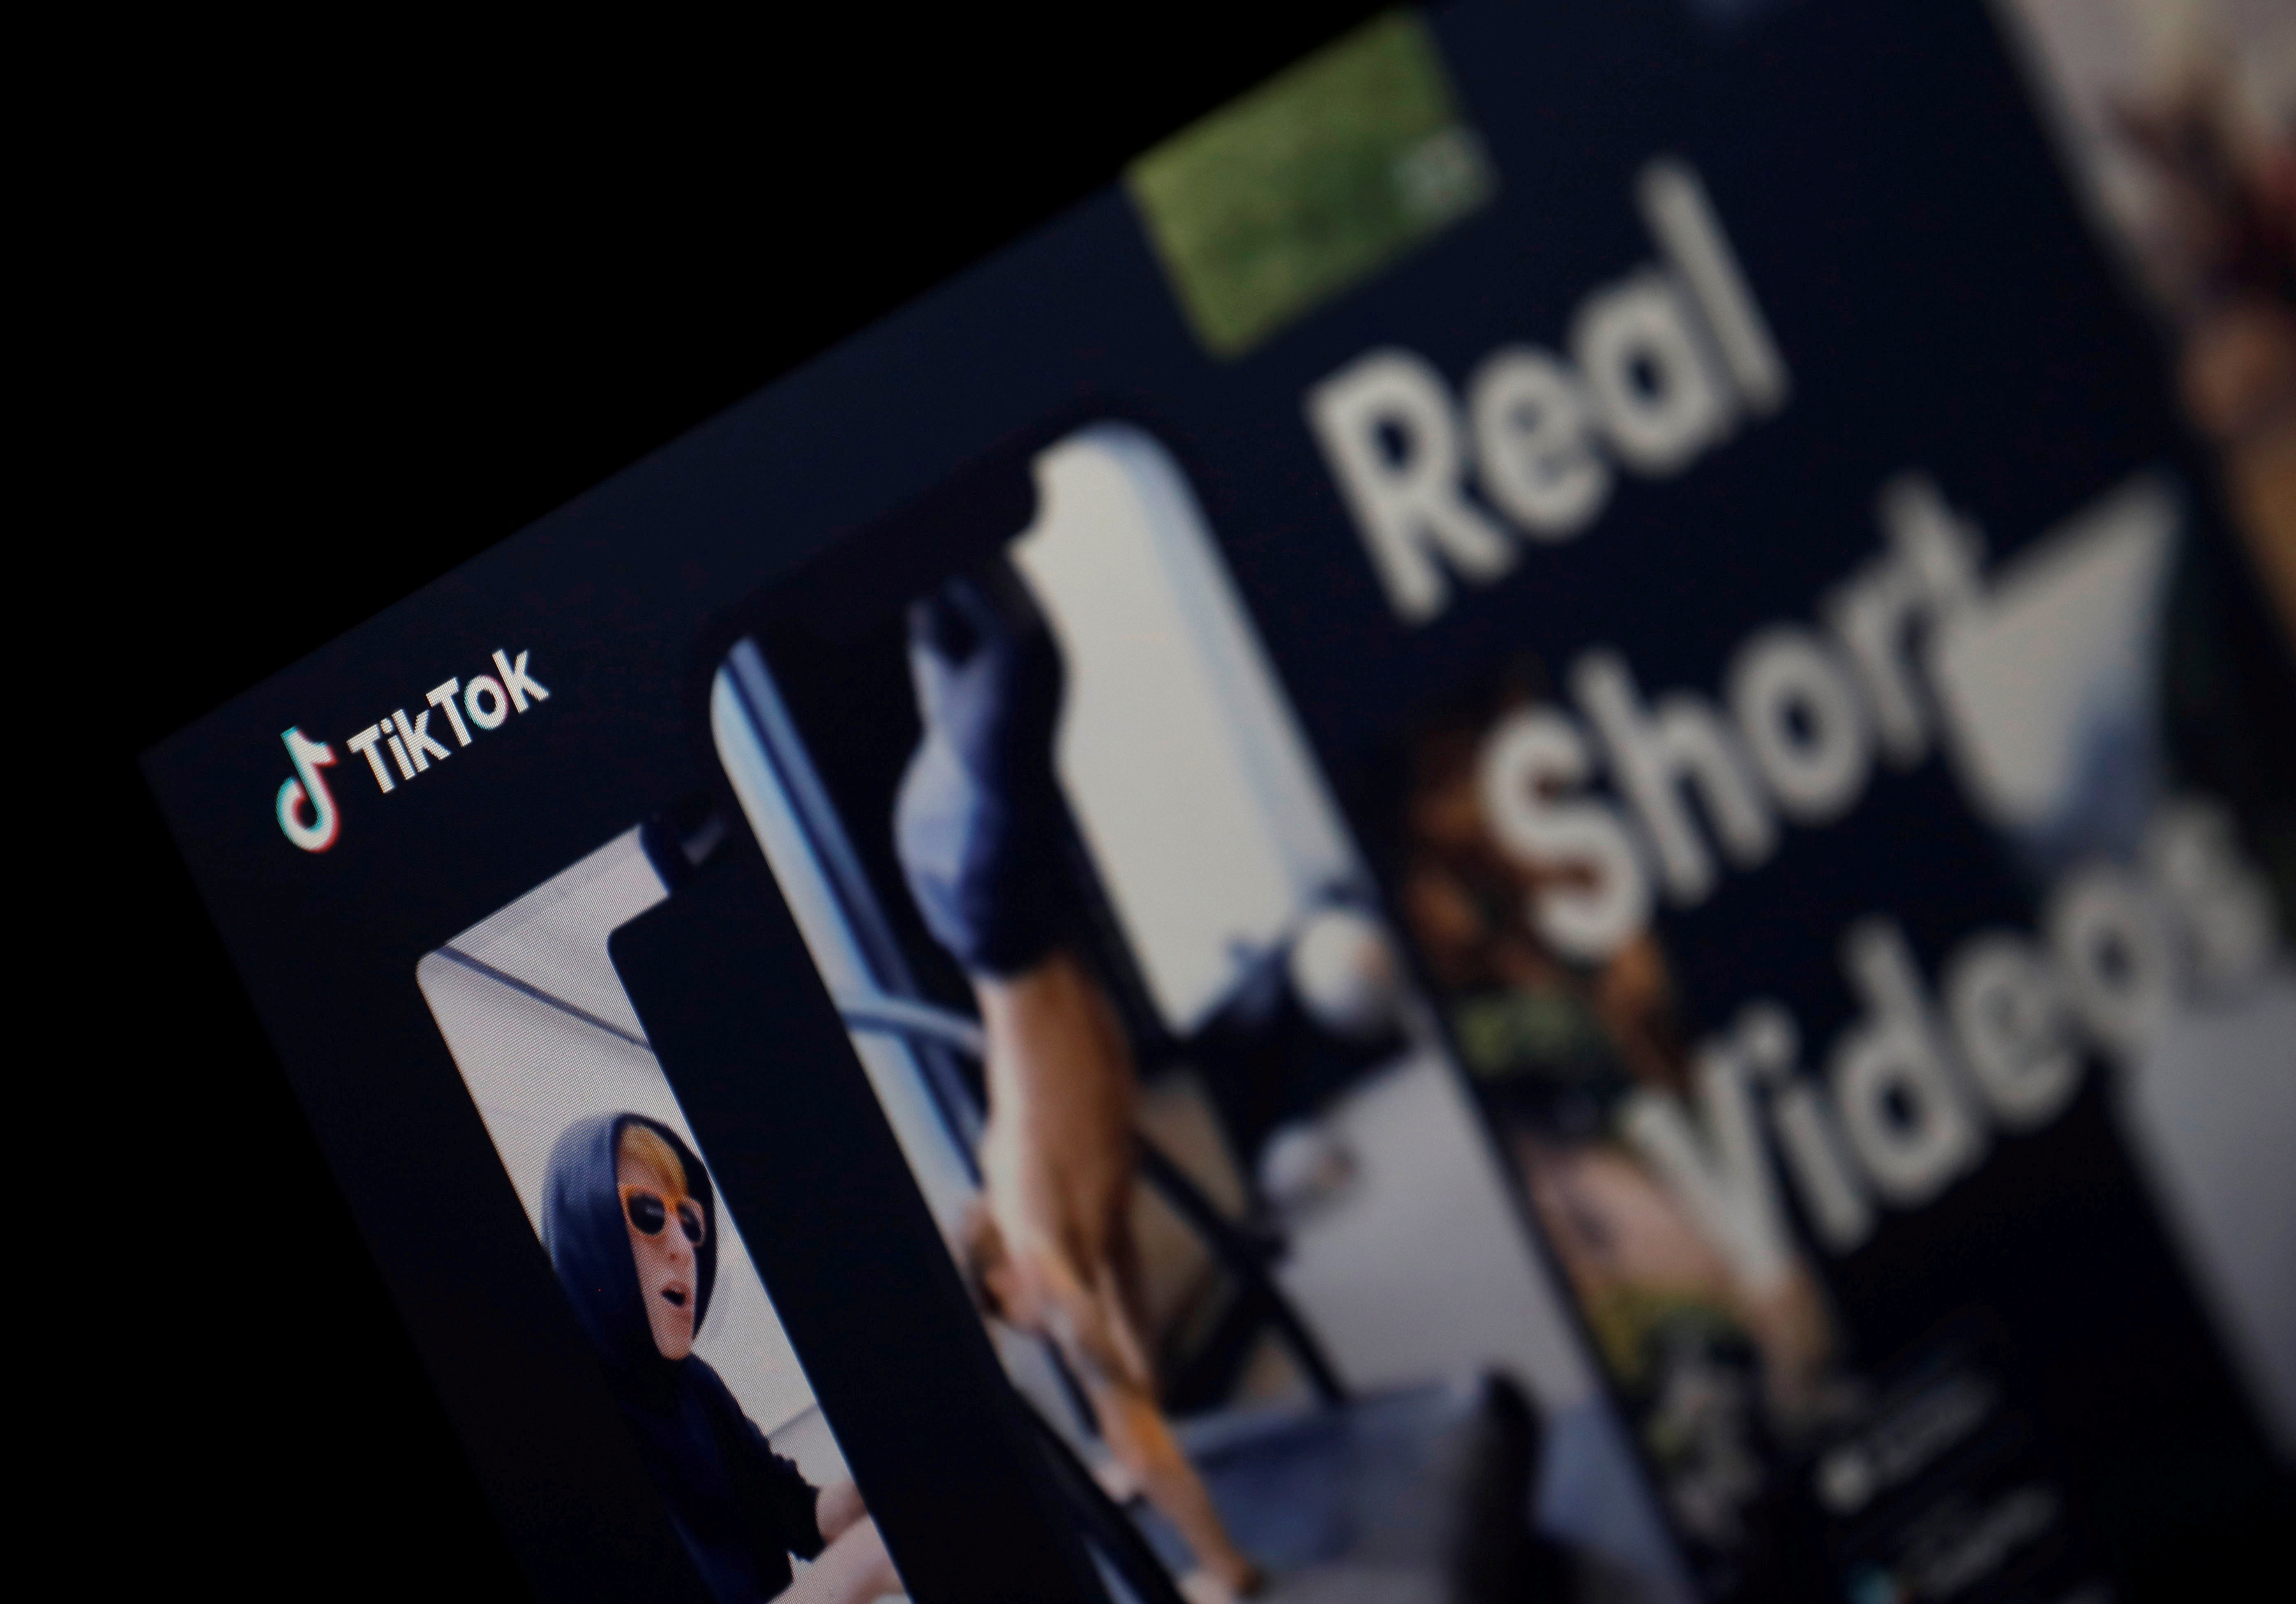 Short-form video app 'Kwai' launches in the UAE - TECHx Media